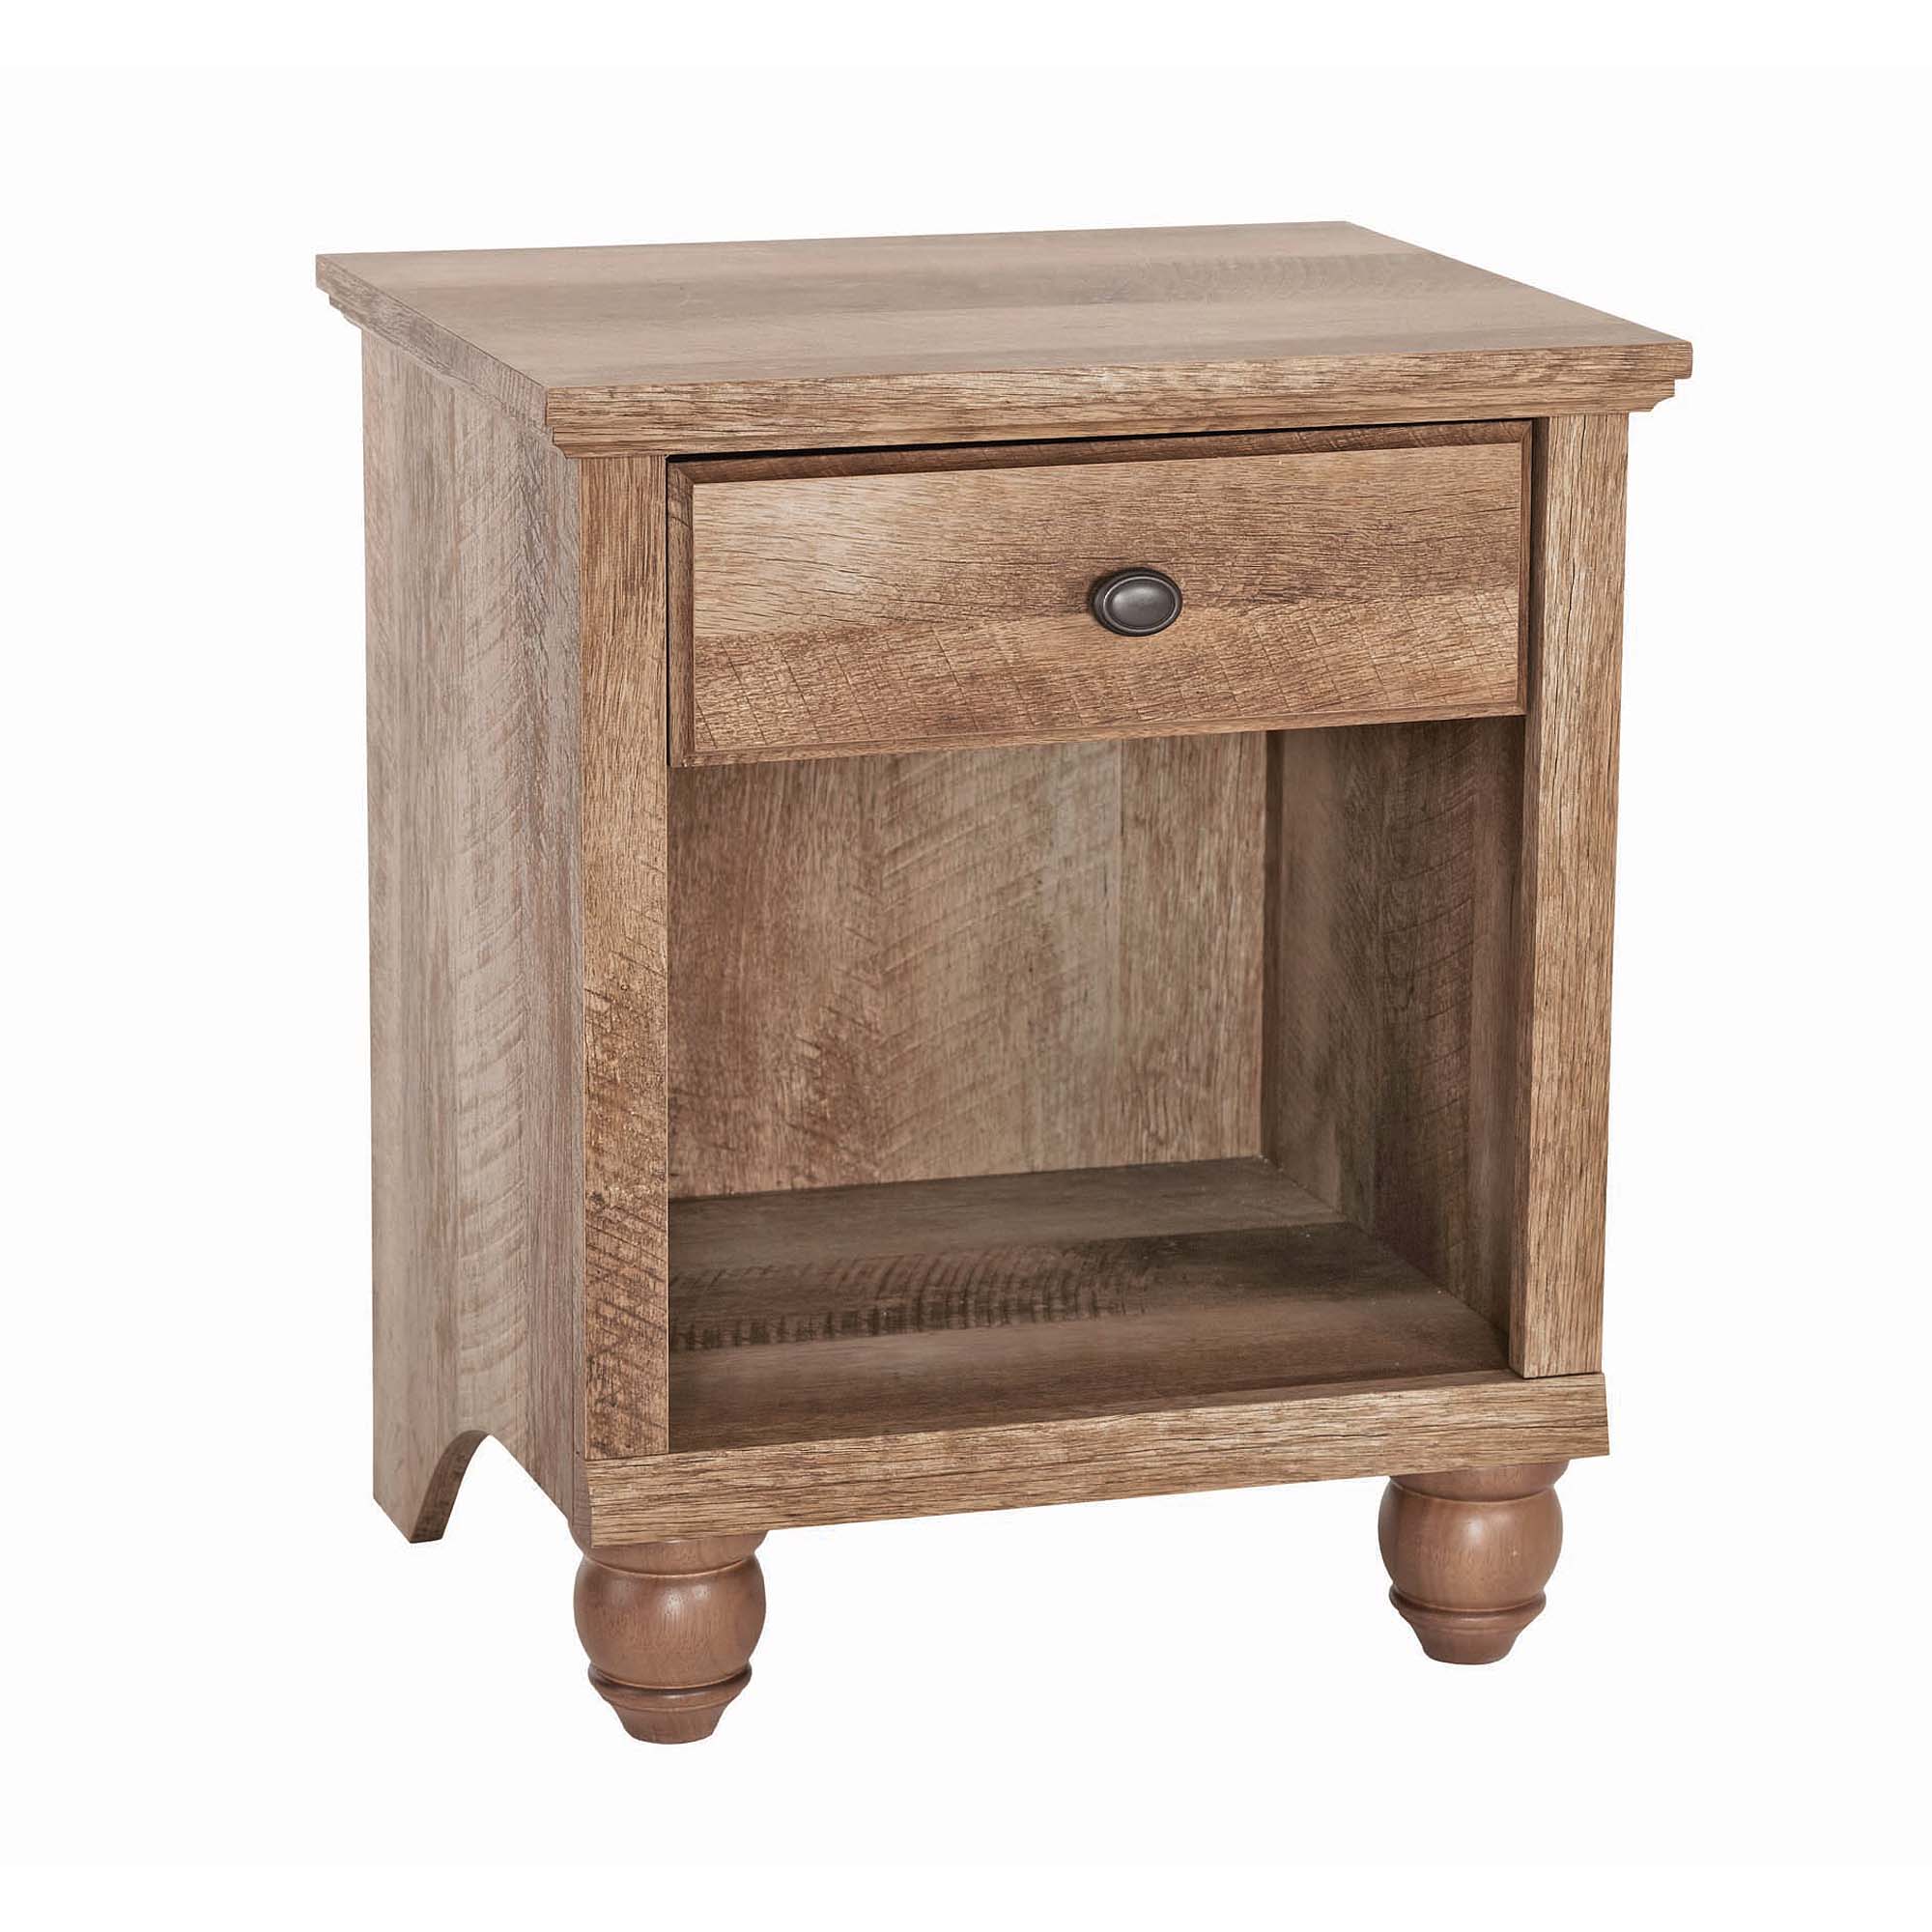 Better Homes & Gardens Crossmill Accent Table, Weathered Finish - image 3 of 8